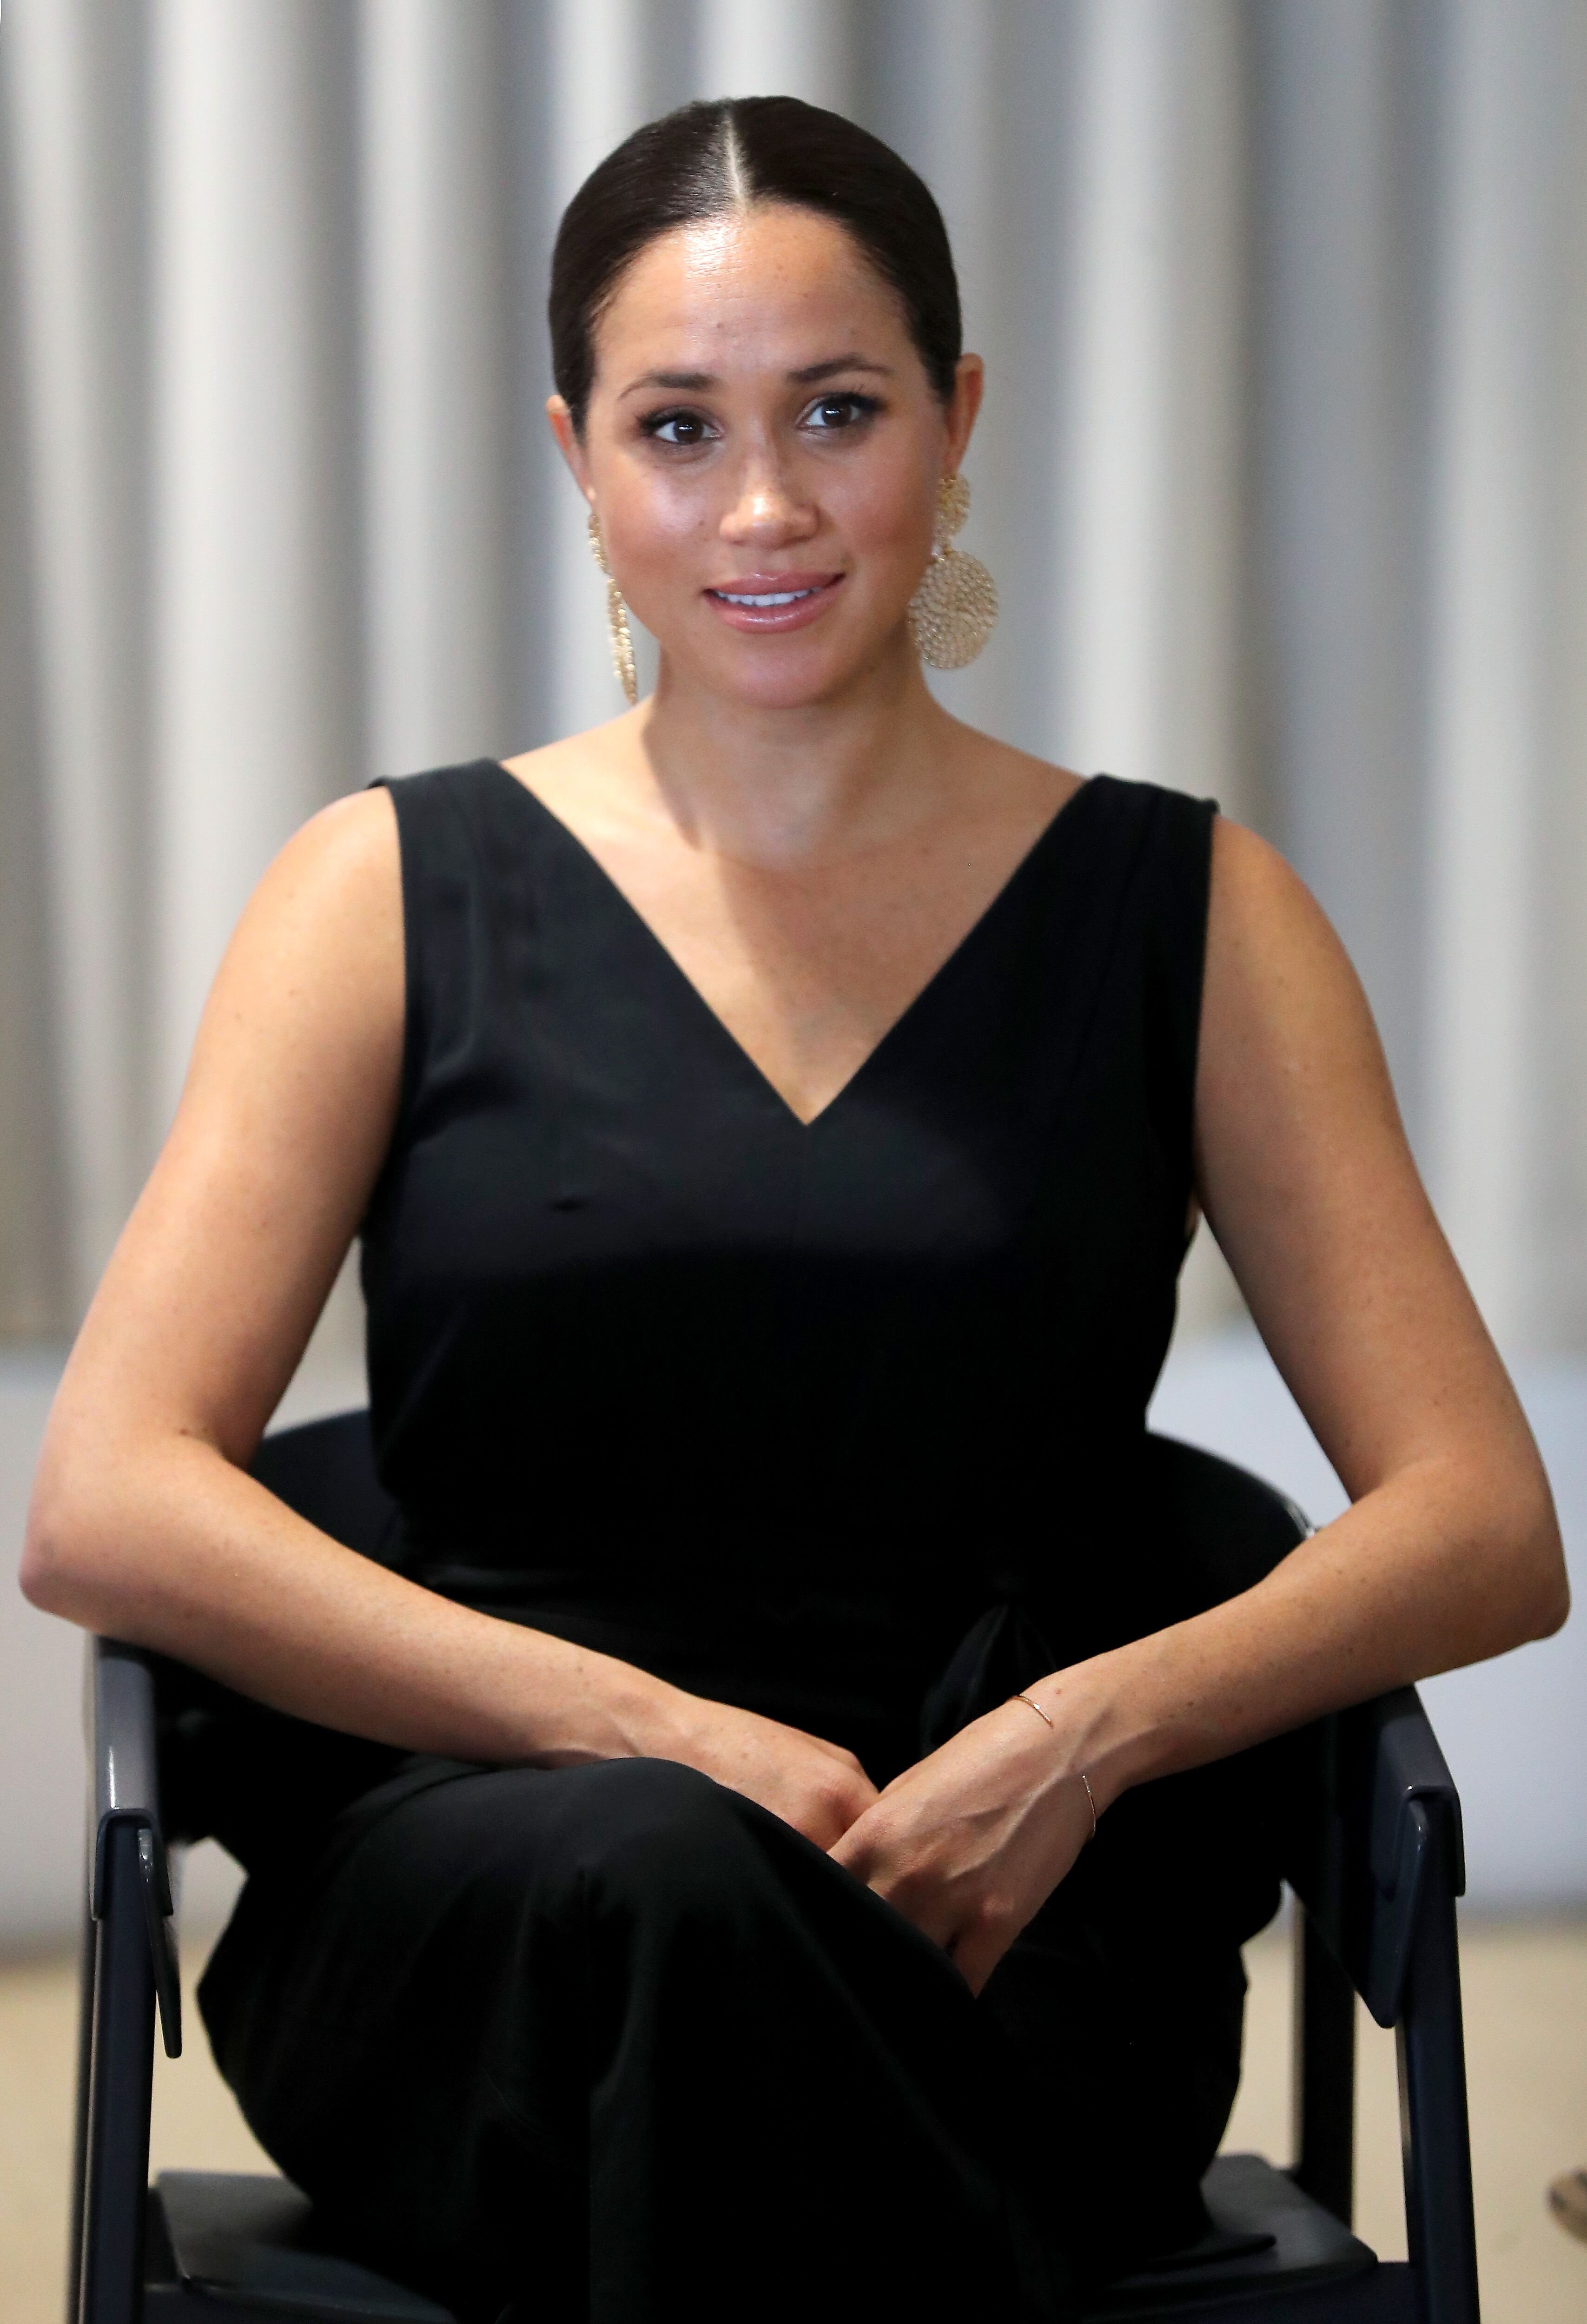 Meghan Markle visits Woodstock Exchange, a women founders/social entrepreneurs event during her royal tour of South Africa with Prince Harry, Duke of Sussex on September 25, 2019 in Cape Town, South Africa. | Source: Getty Images